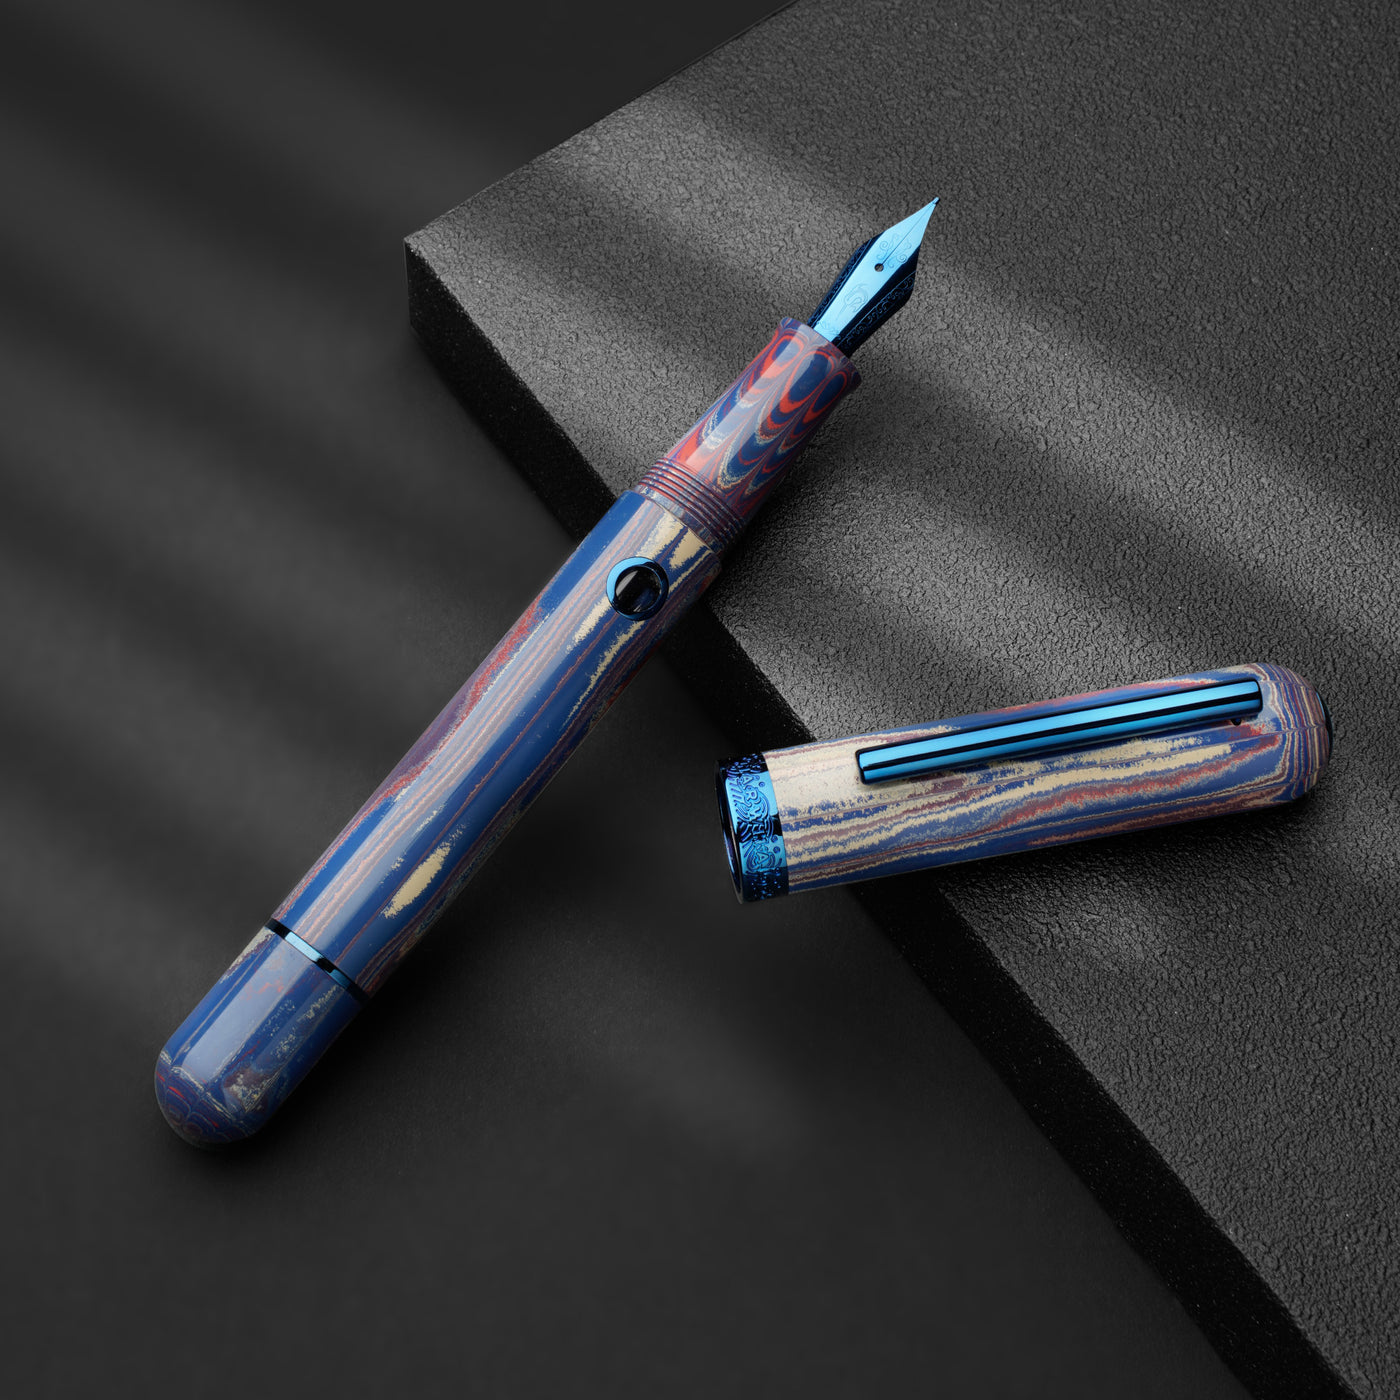 Nahvalur (Narwhal) Nautilus Fountain Pen - The Blue Ringed (Limited Edition)